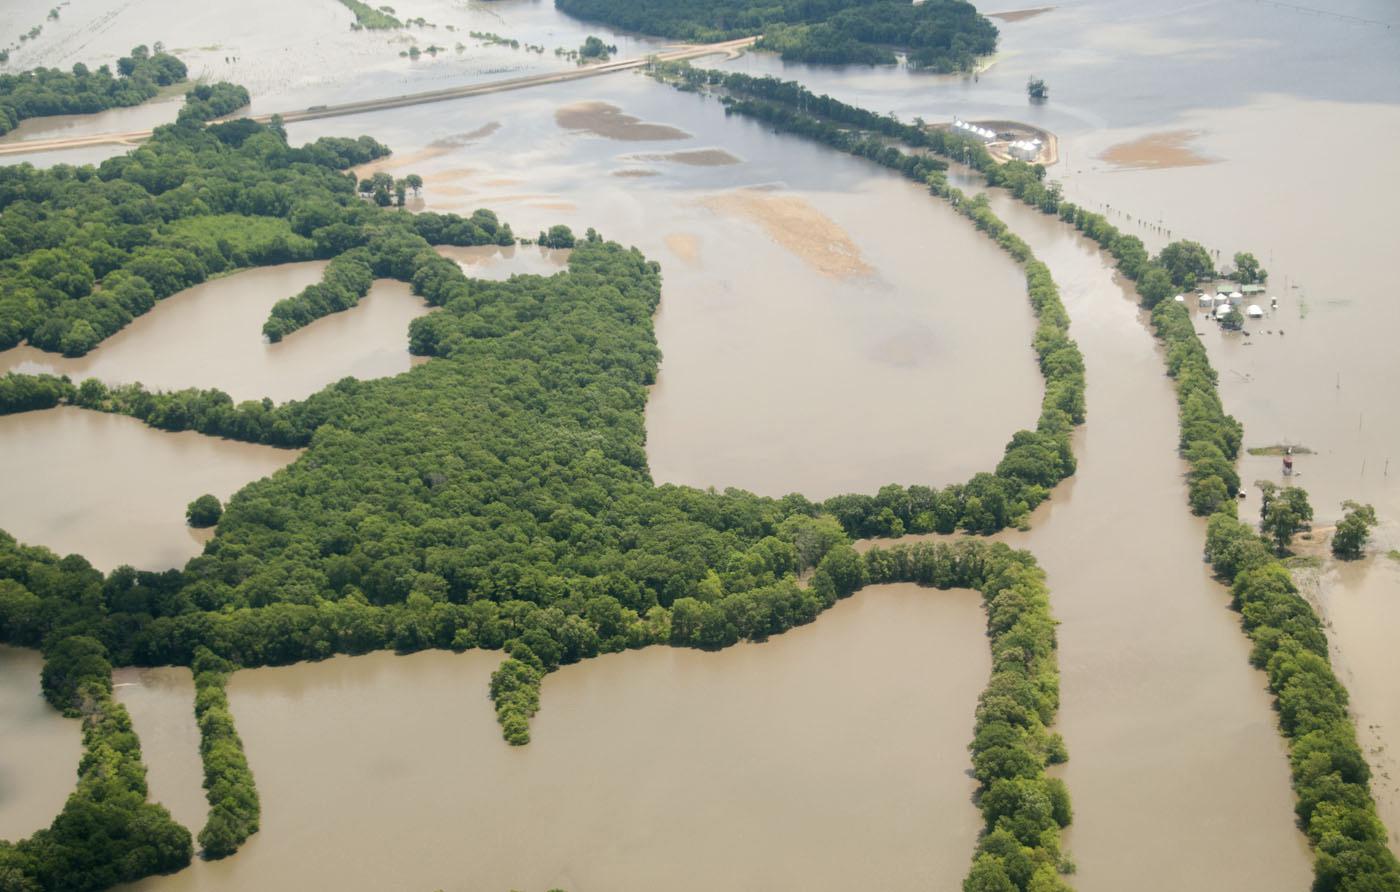 The overflowing Mississippi River and its tributaries are threatening the Delta's trees, but many can survive for weeks in flood waters as long as their crowns remain above water and their roots do not become too exposed. (Photo by Scott Corey)